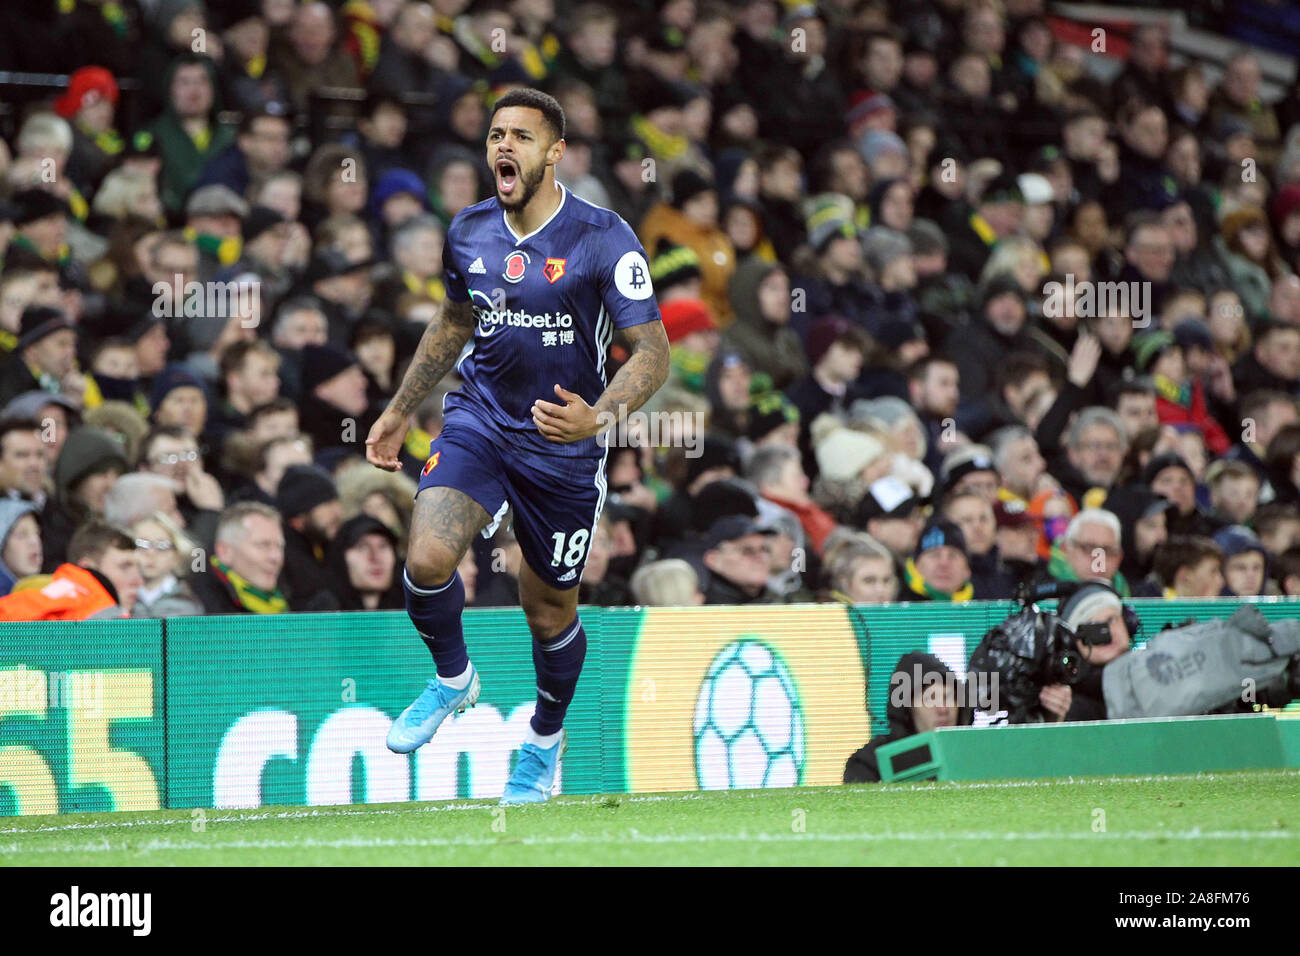 Norwich, UK. 08th Nov, 2019. Andre Gray of Watford celebrates getting the second goal of the game for Watford during the Premier League match between Norwich City and Watford at Carrow Road on November 8th 2019 in Norwich, England. (Photo by Mick Kearns/phcimages.com) Credit: PHC Images/Alamy Live News Stock Photo